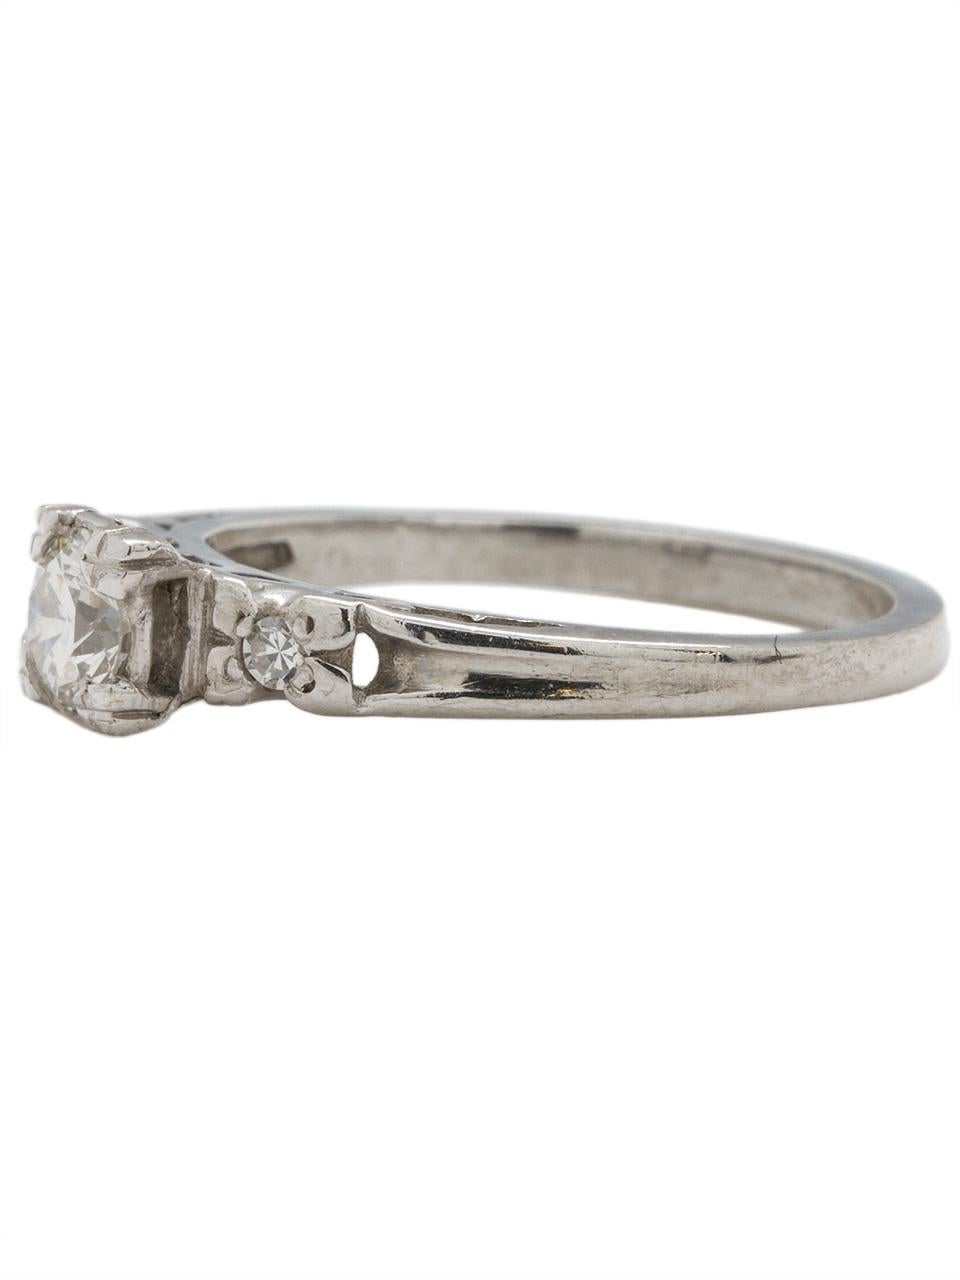 Lovely vintage platinum diamond engagement ring featuring a 0.45ct I-VS1 round brilliant cut flanked by two small single cut side stones. Gorgeous Retro design and open galleries with raised setting. Lovely paired with a vintage diamond wedding